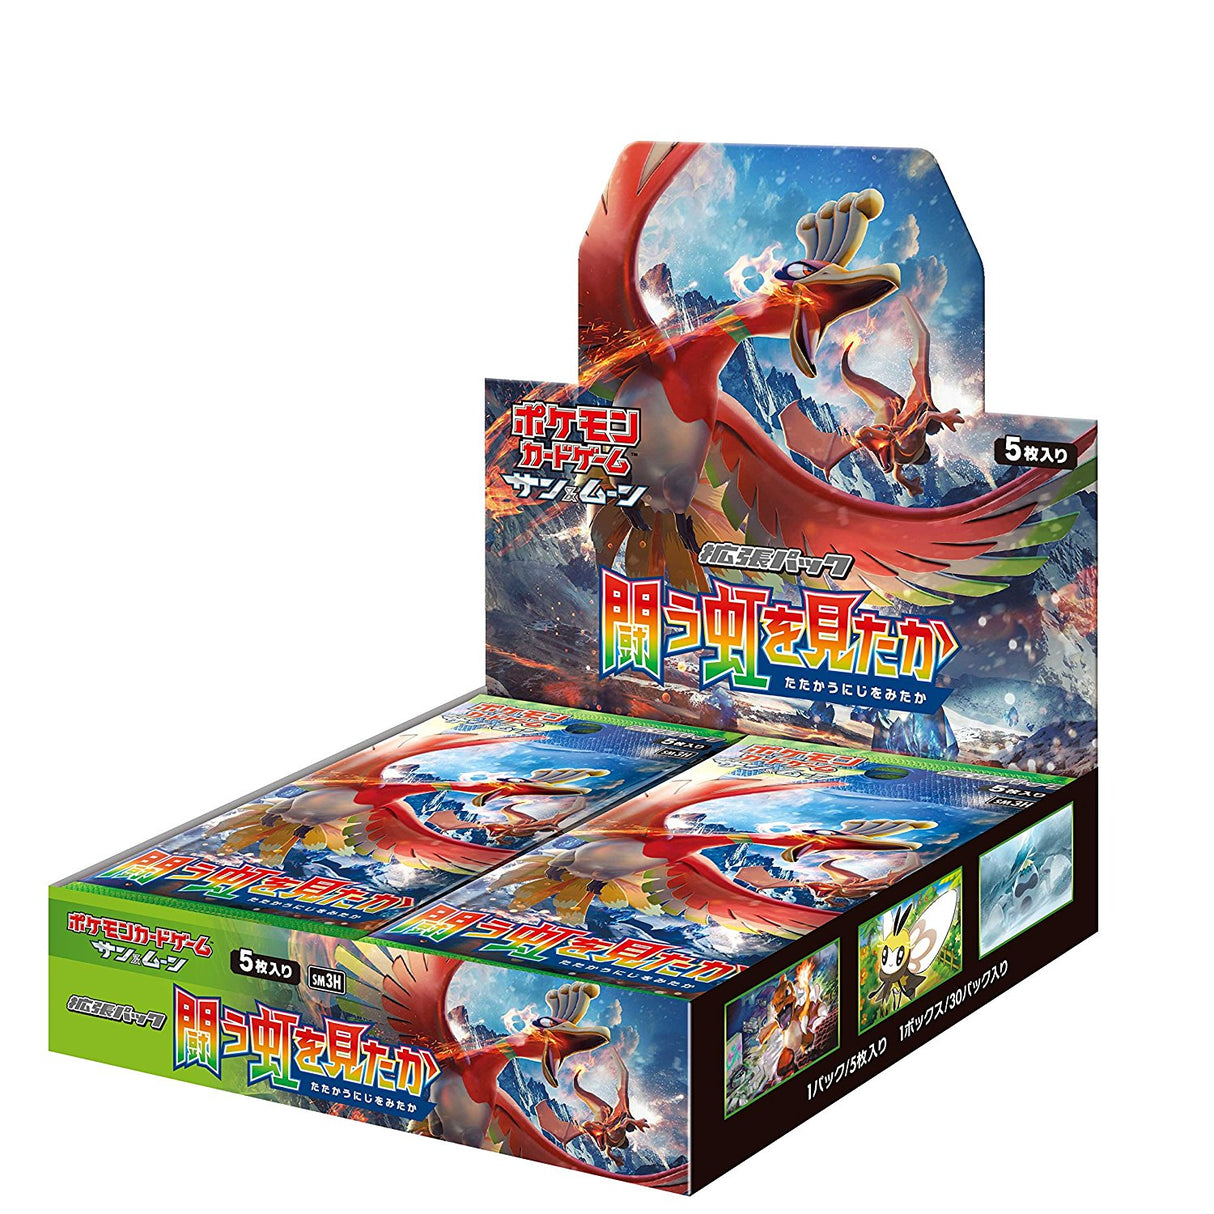 Japanese Pokemon Sun & Moon SM3H "To Have Seen the Battle Rainbow" Booster Box